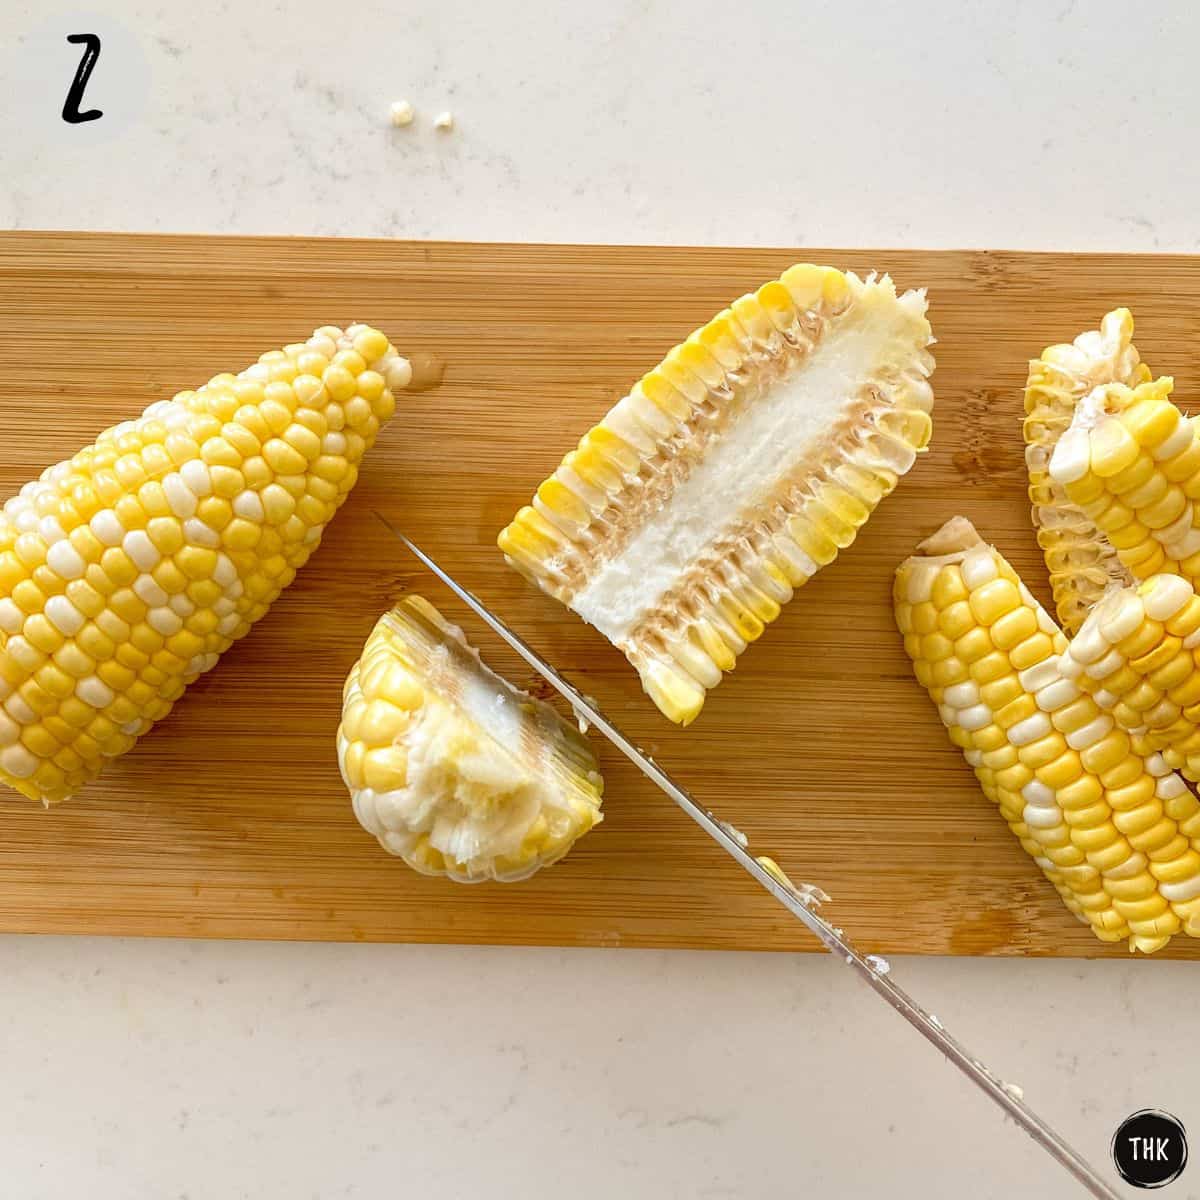 Corn on the cob sliced in half vertically on cutting board.